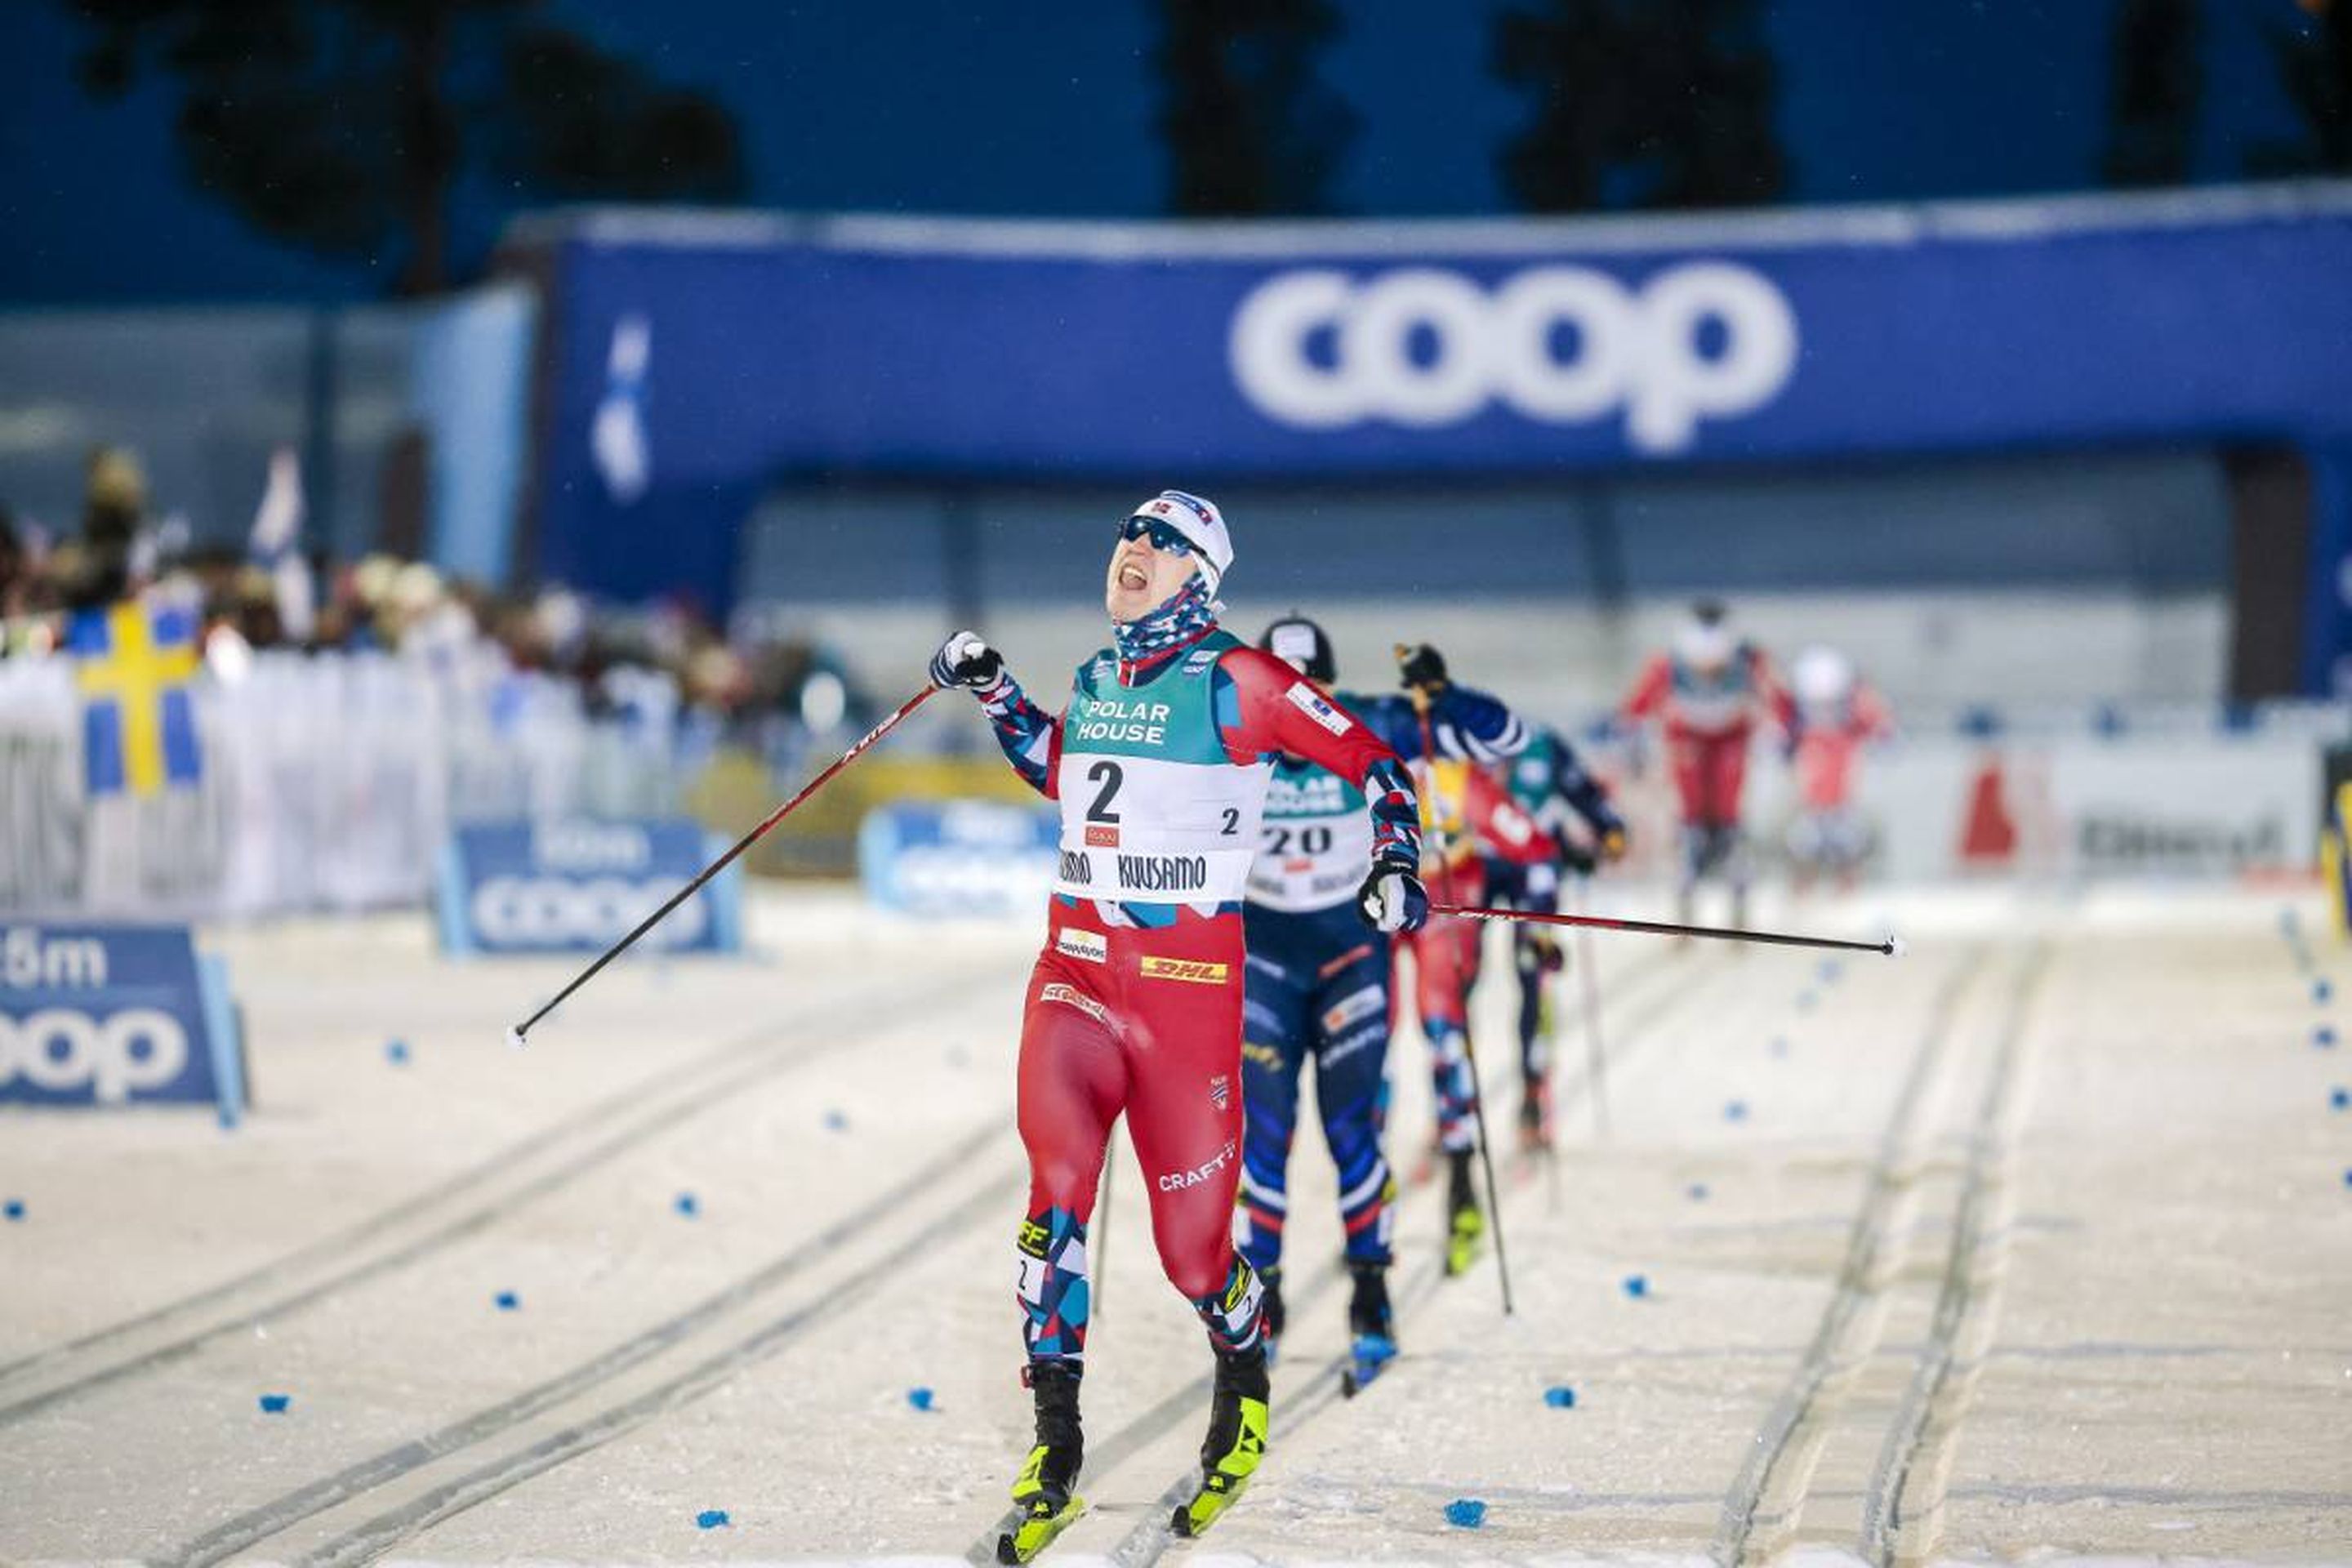 Norway's Erik Valnes wins the first men's World Cup competition of the season © Nordic Focus